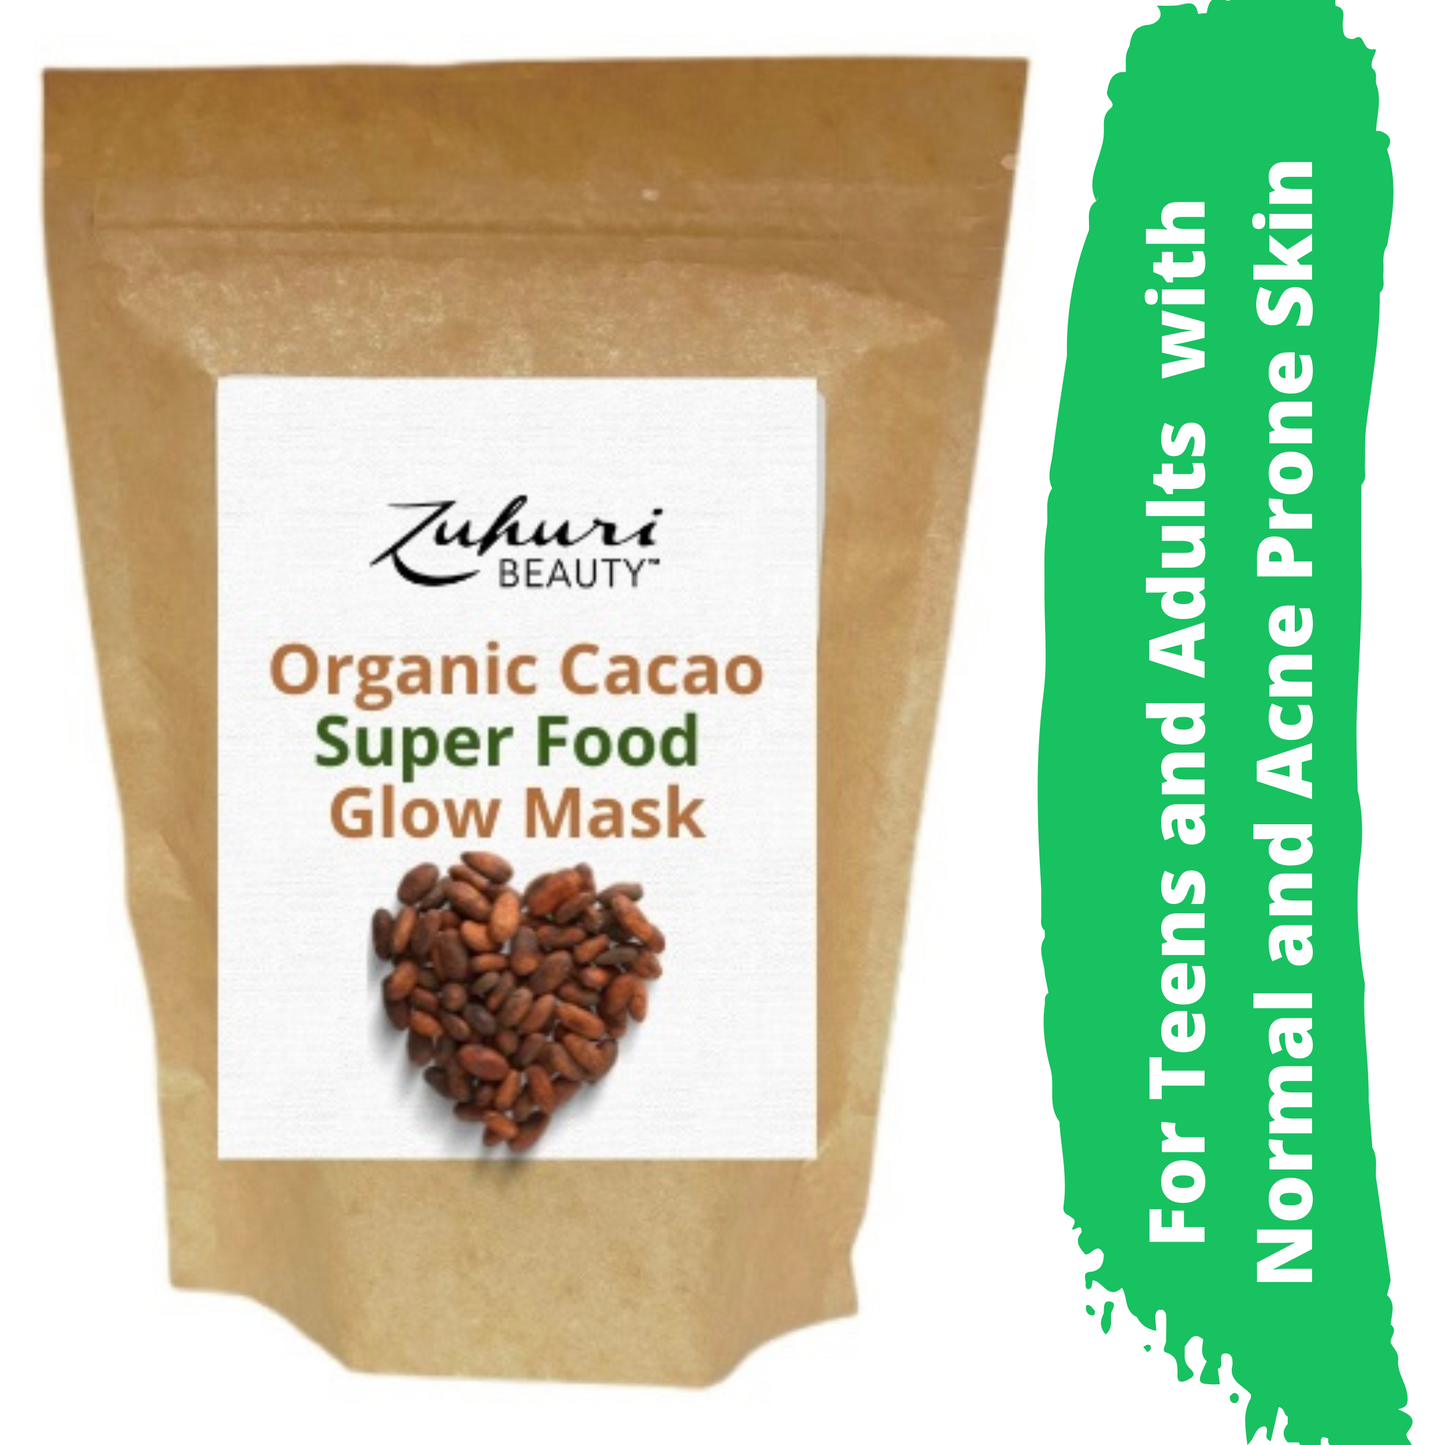 Cacao Face Mask, Super Food Face Mask, Glow Mask, AntiAging Skin Care, Teen Acne Mask, ZUhuri Beauty Mask